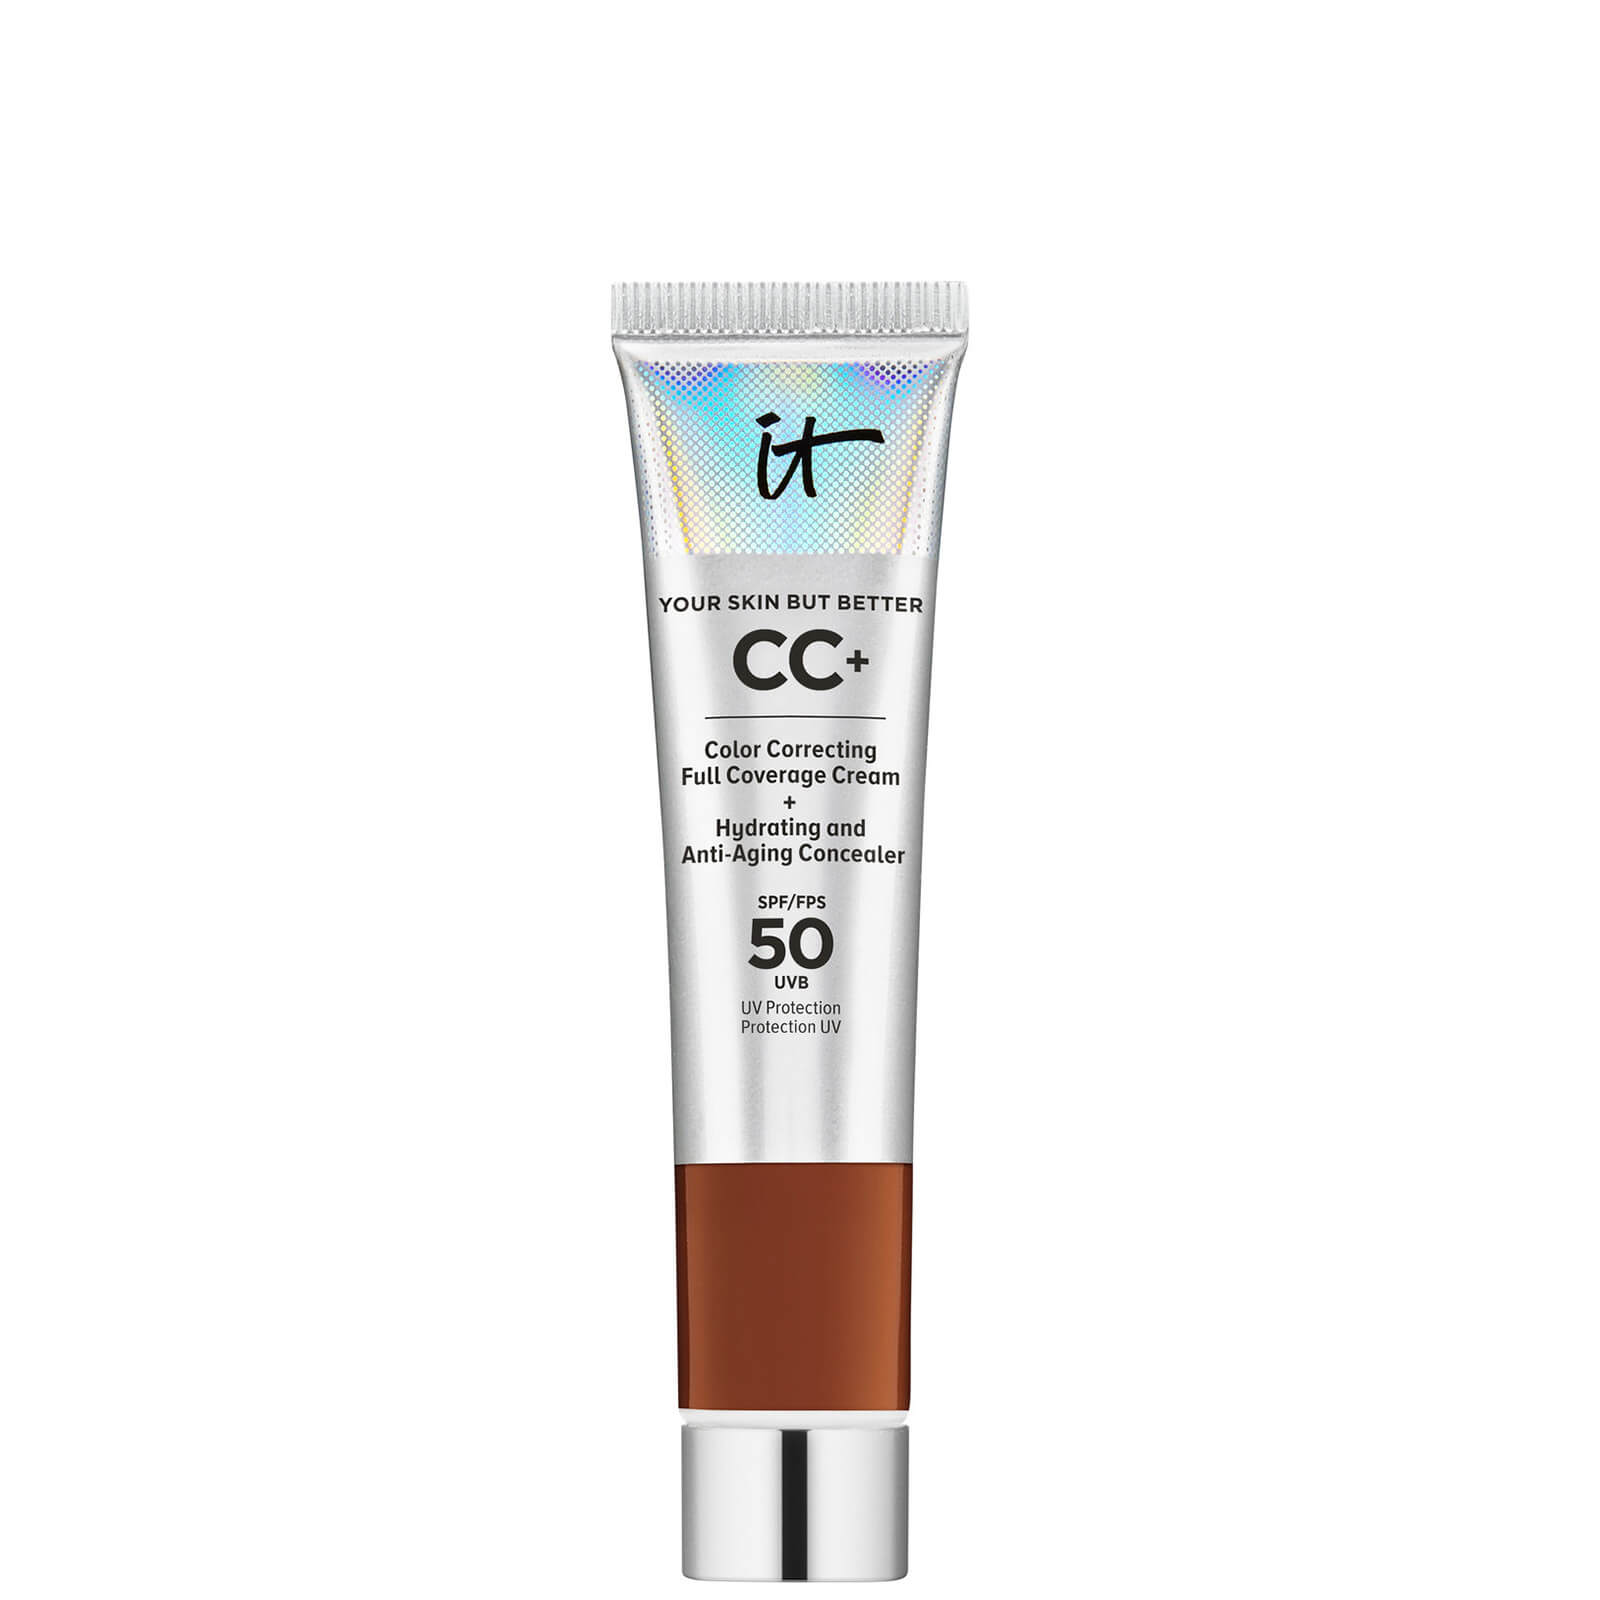 IT Cosmetics Your Skin But Better CC+ Cream with SPF50 12ml (Various Shades) - Deep